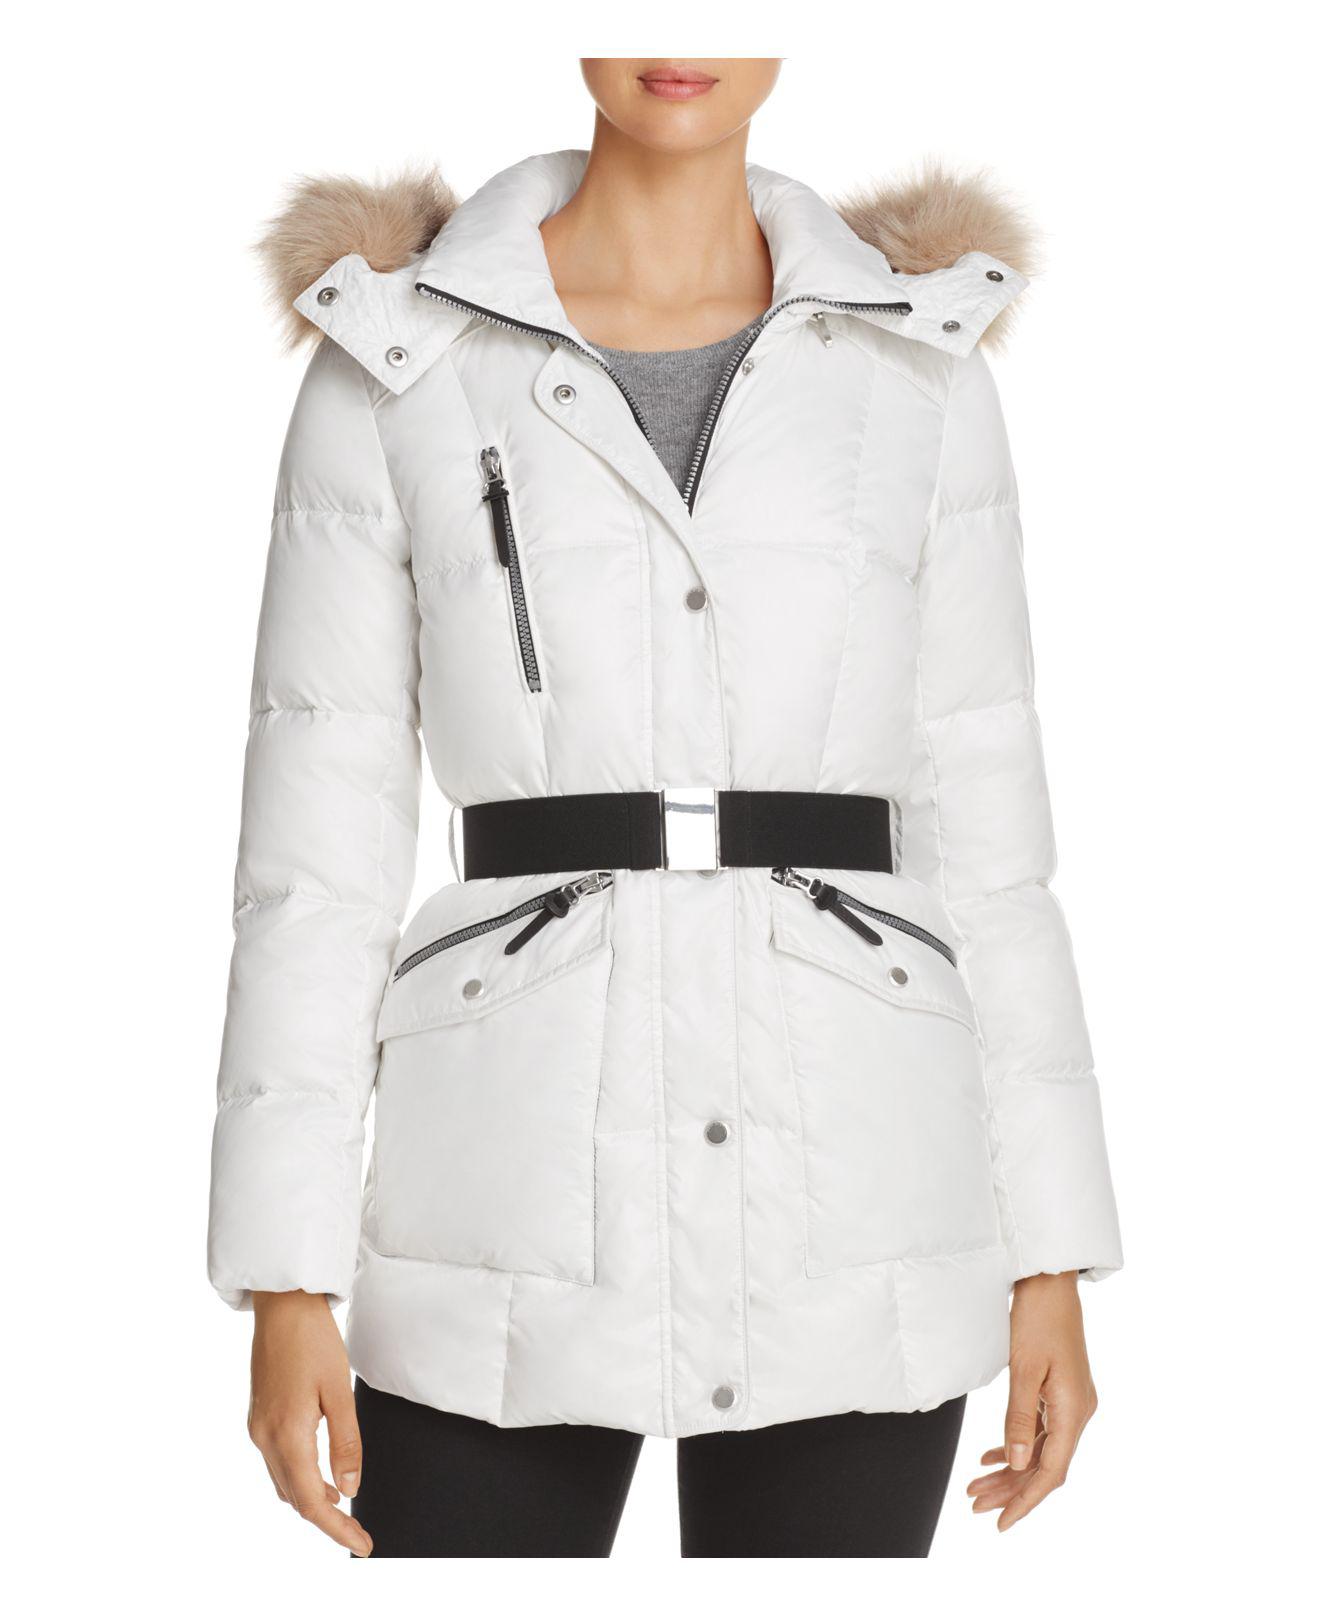 Lyst - Marc New York Lucy Faux Fur Trim Puffer Jacket in White